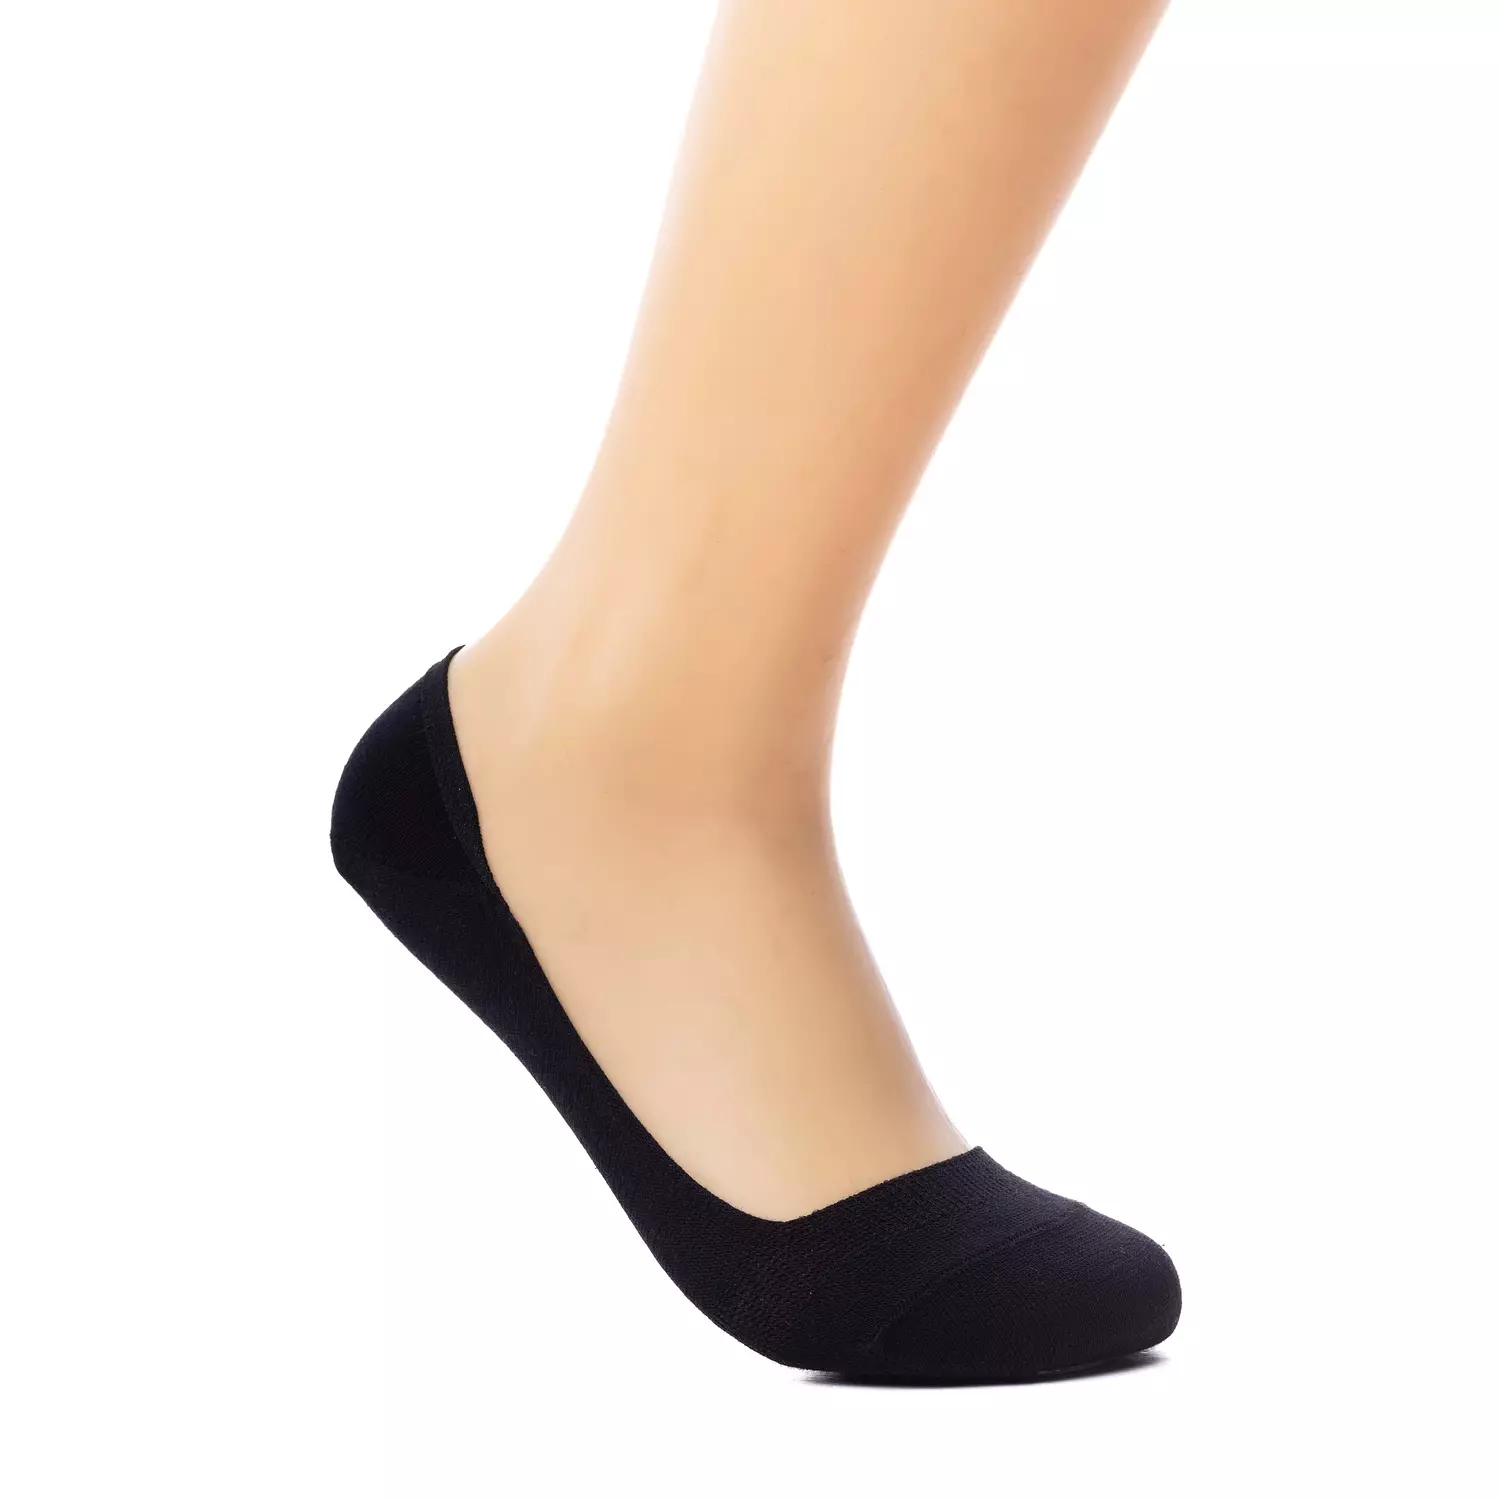 Viva invisible Sock for women's hover image